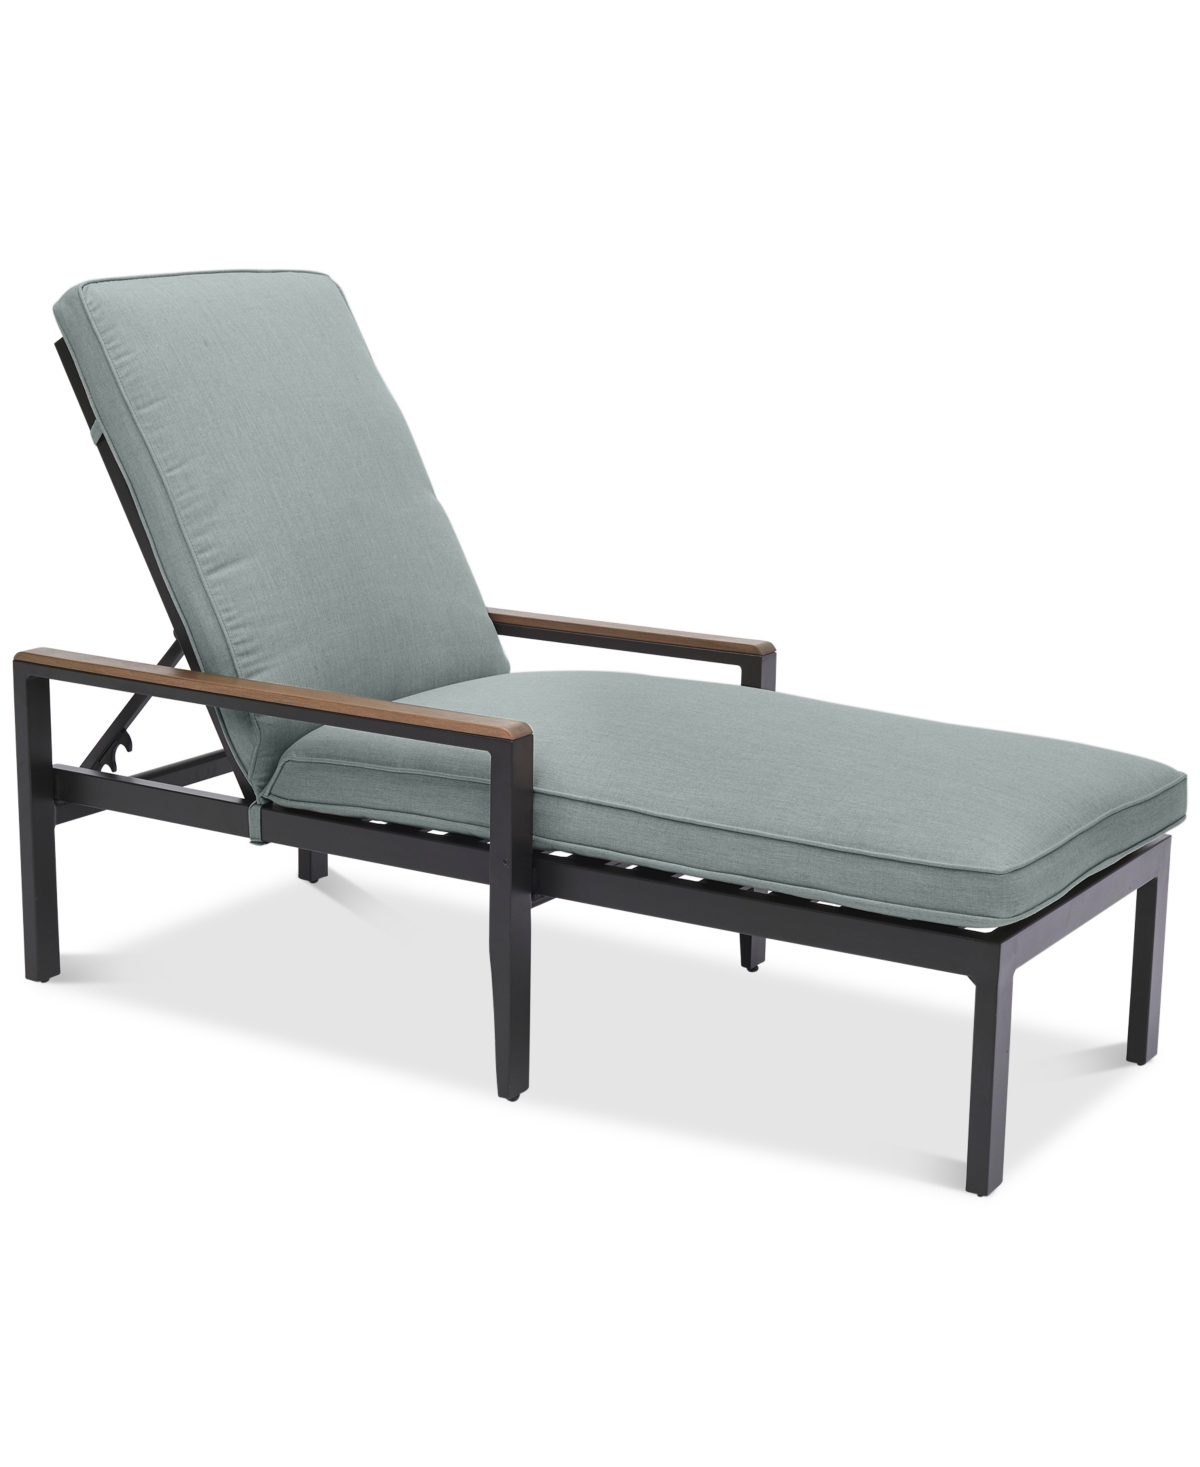 10397499 Stockholm Outdoor Chaise Lounge with Outdoor Cushi sku 10397499